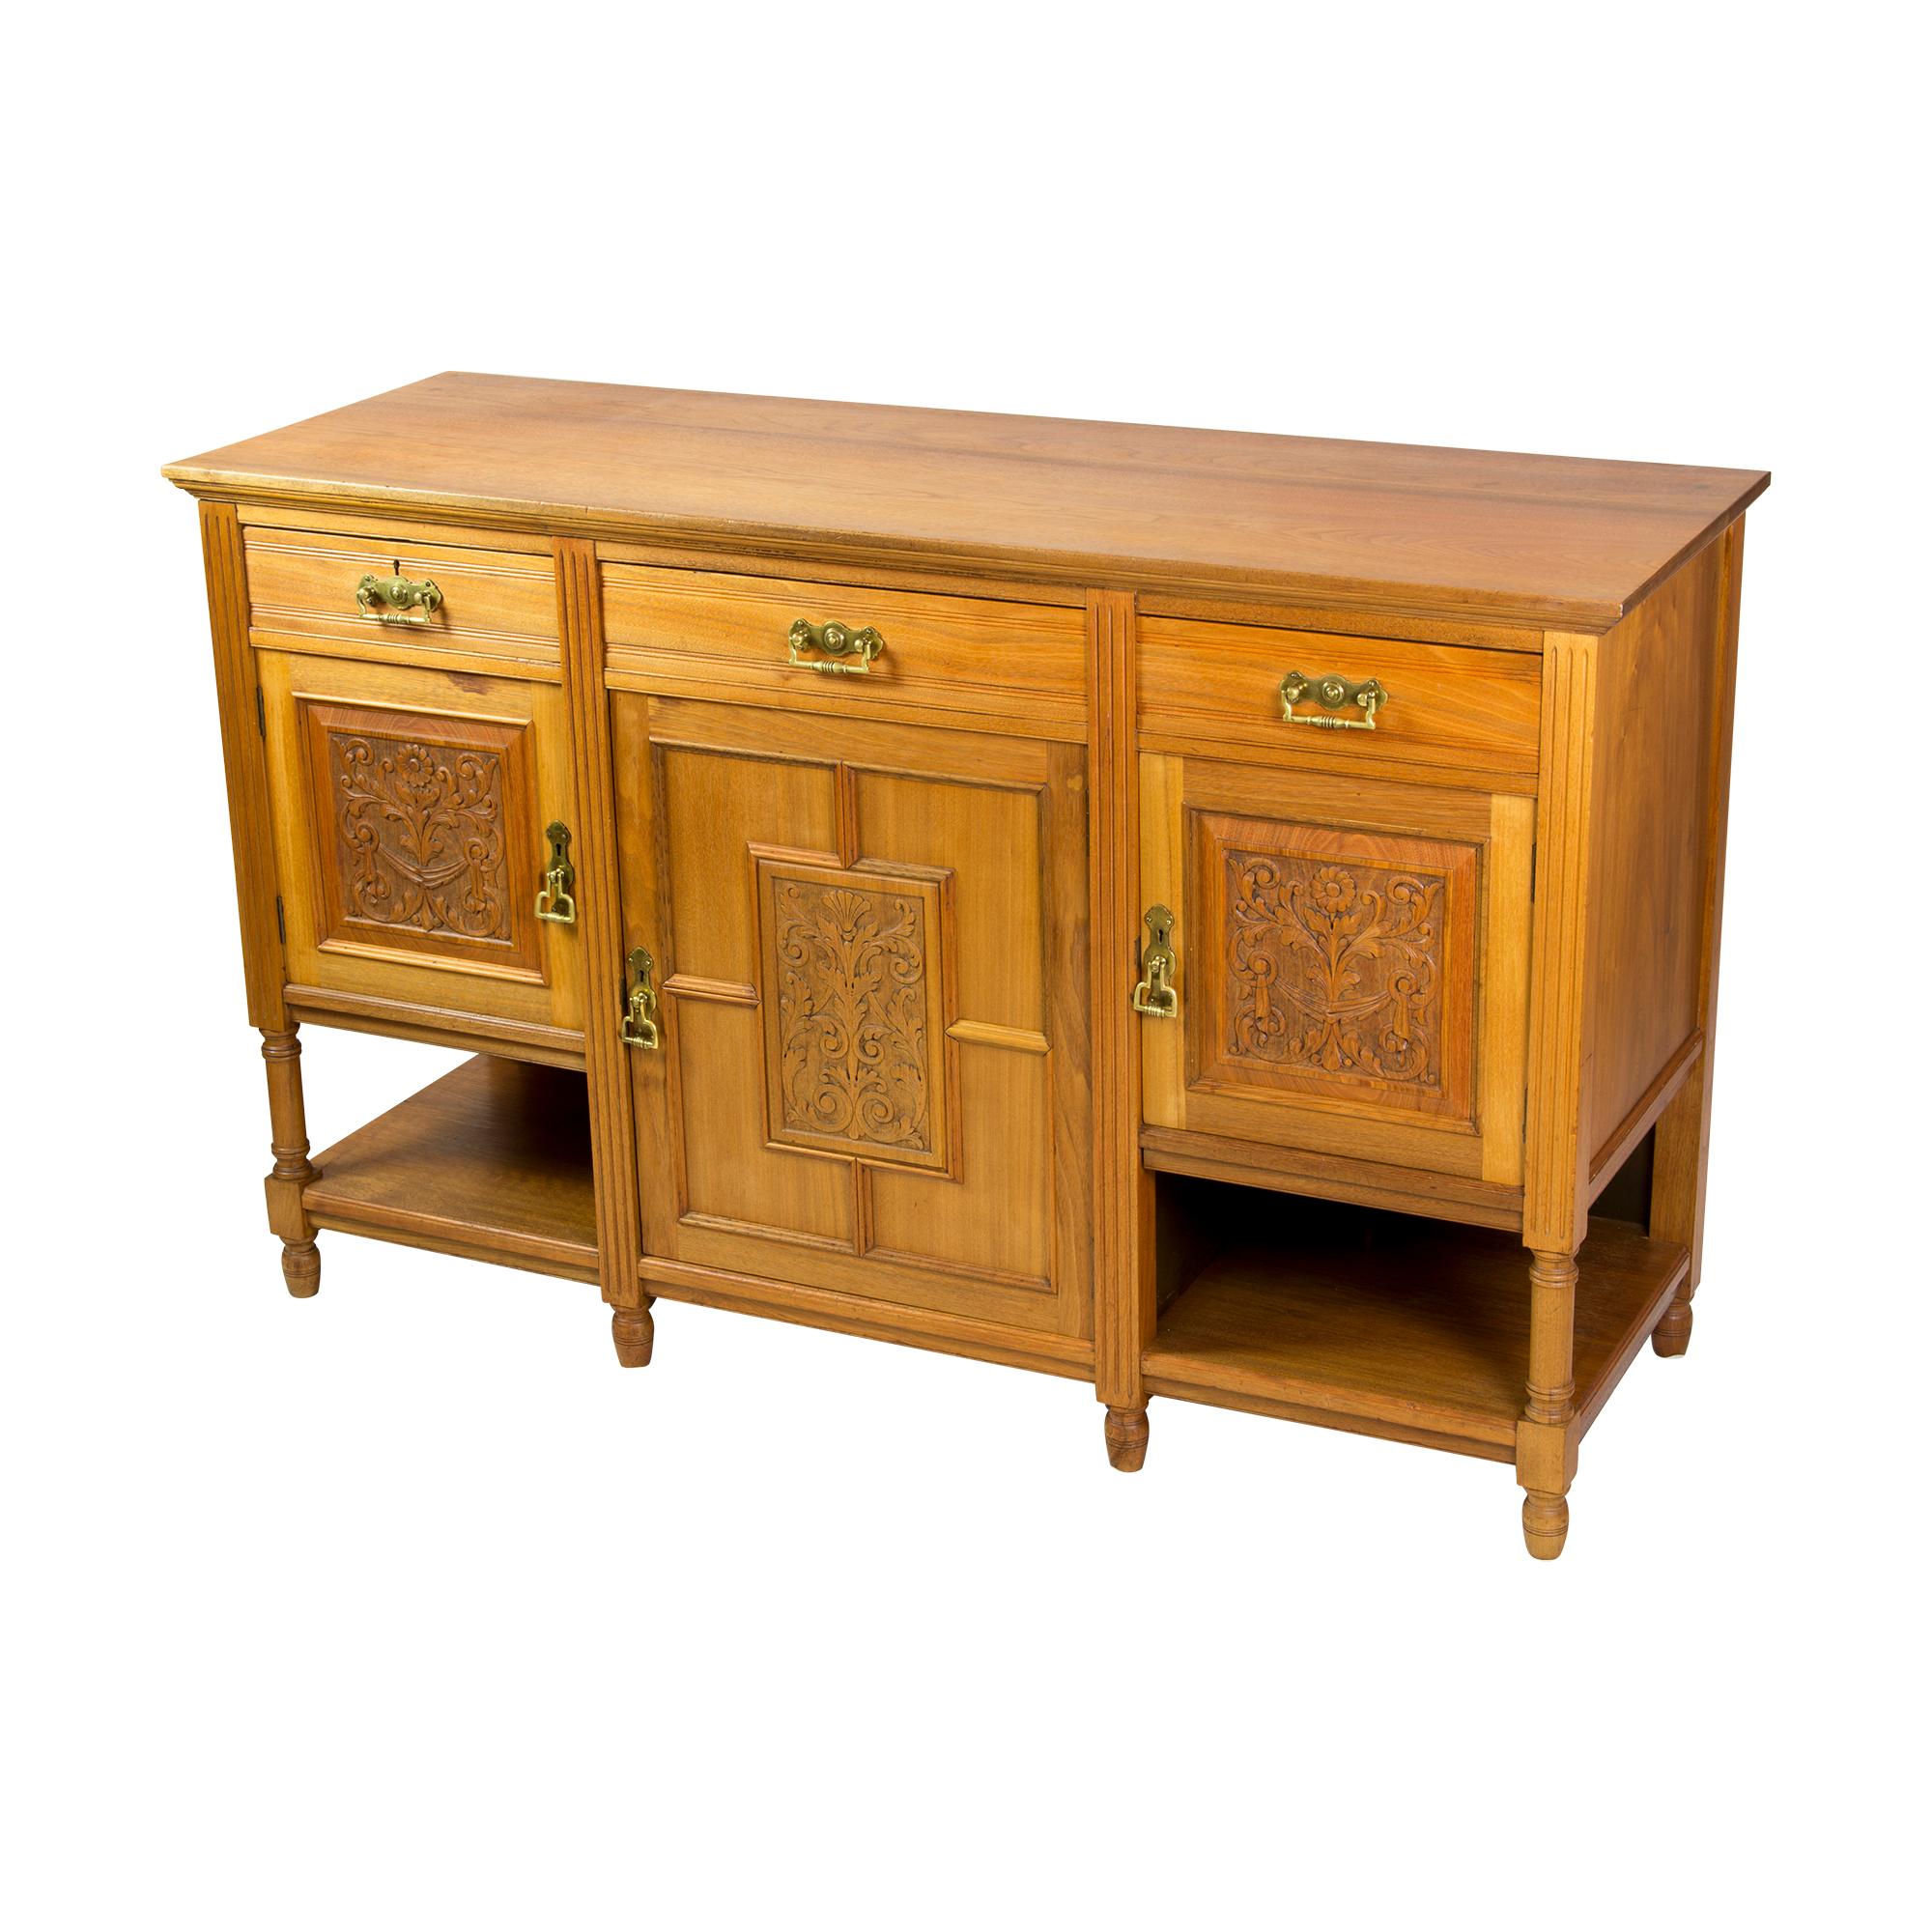 The sideboard comes from England from the late 19th century, it was built from English walnut in the course of the Aesthetic Movement. The fittings are made of brass, the doors open by turning the handles, keys are not provided. 
The sideboard has